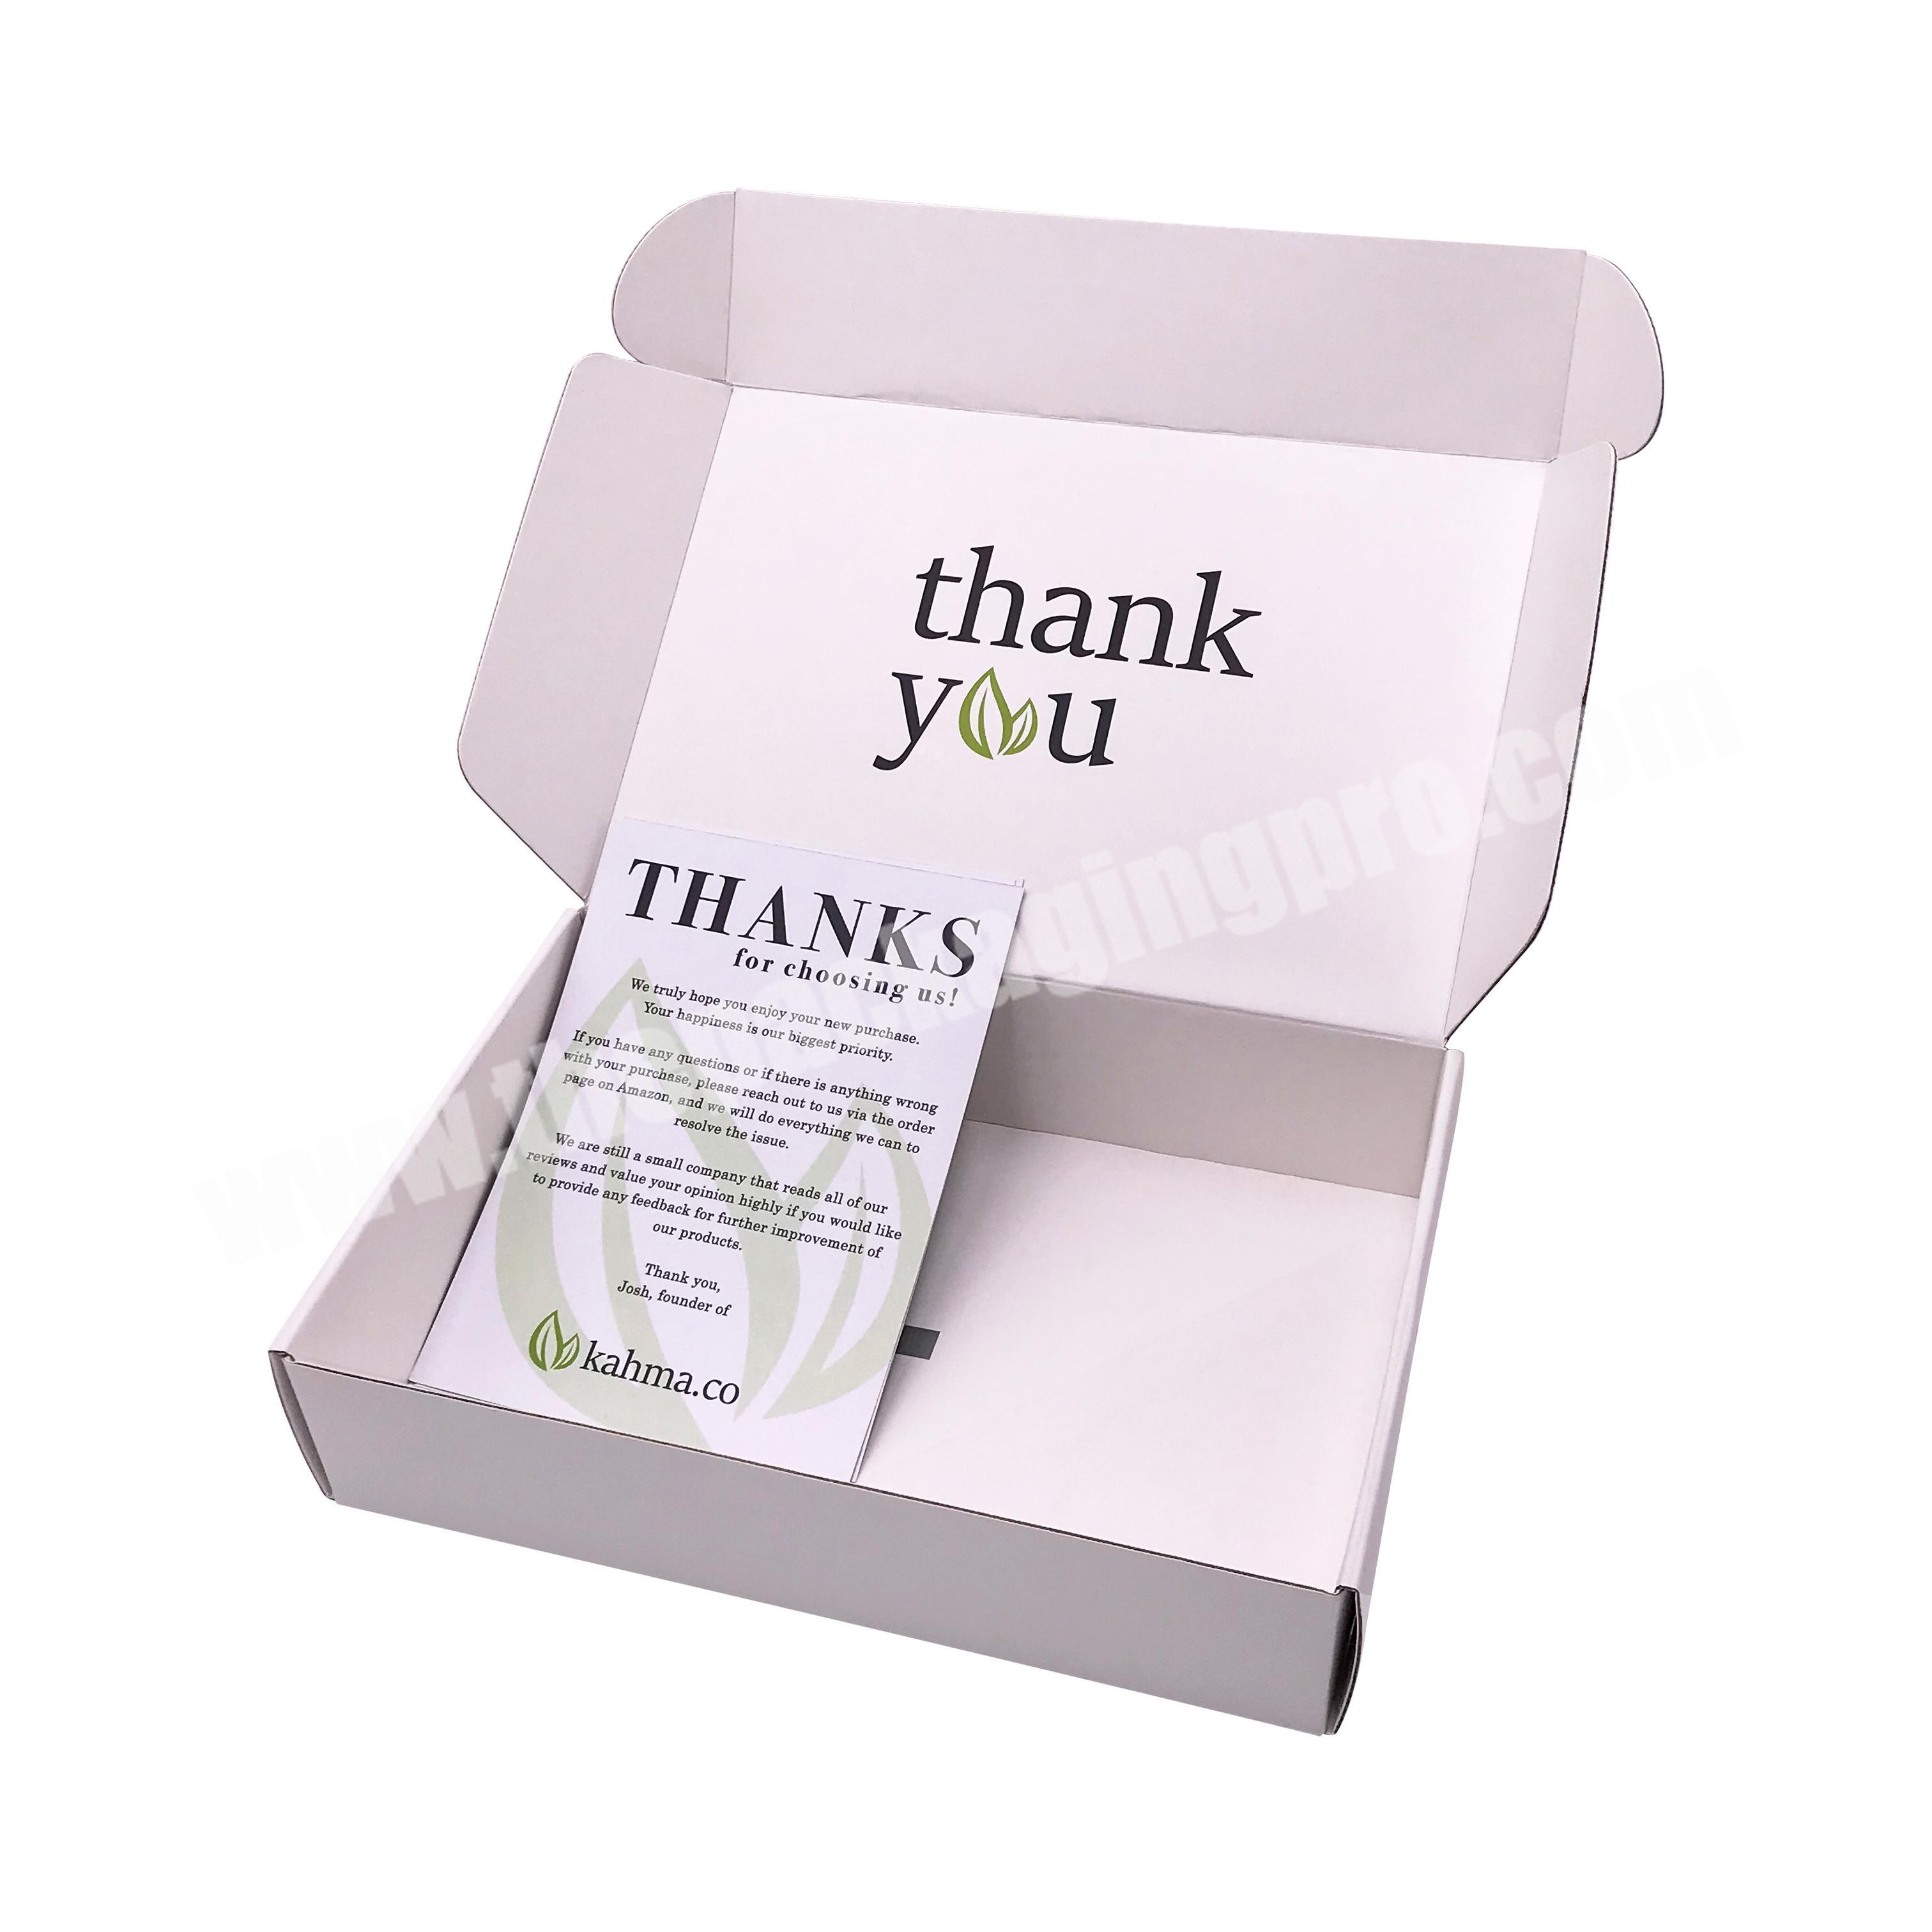 New design shoe box for thank you gift packaging printed boxes neck tie set